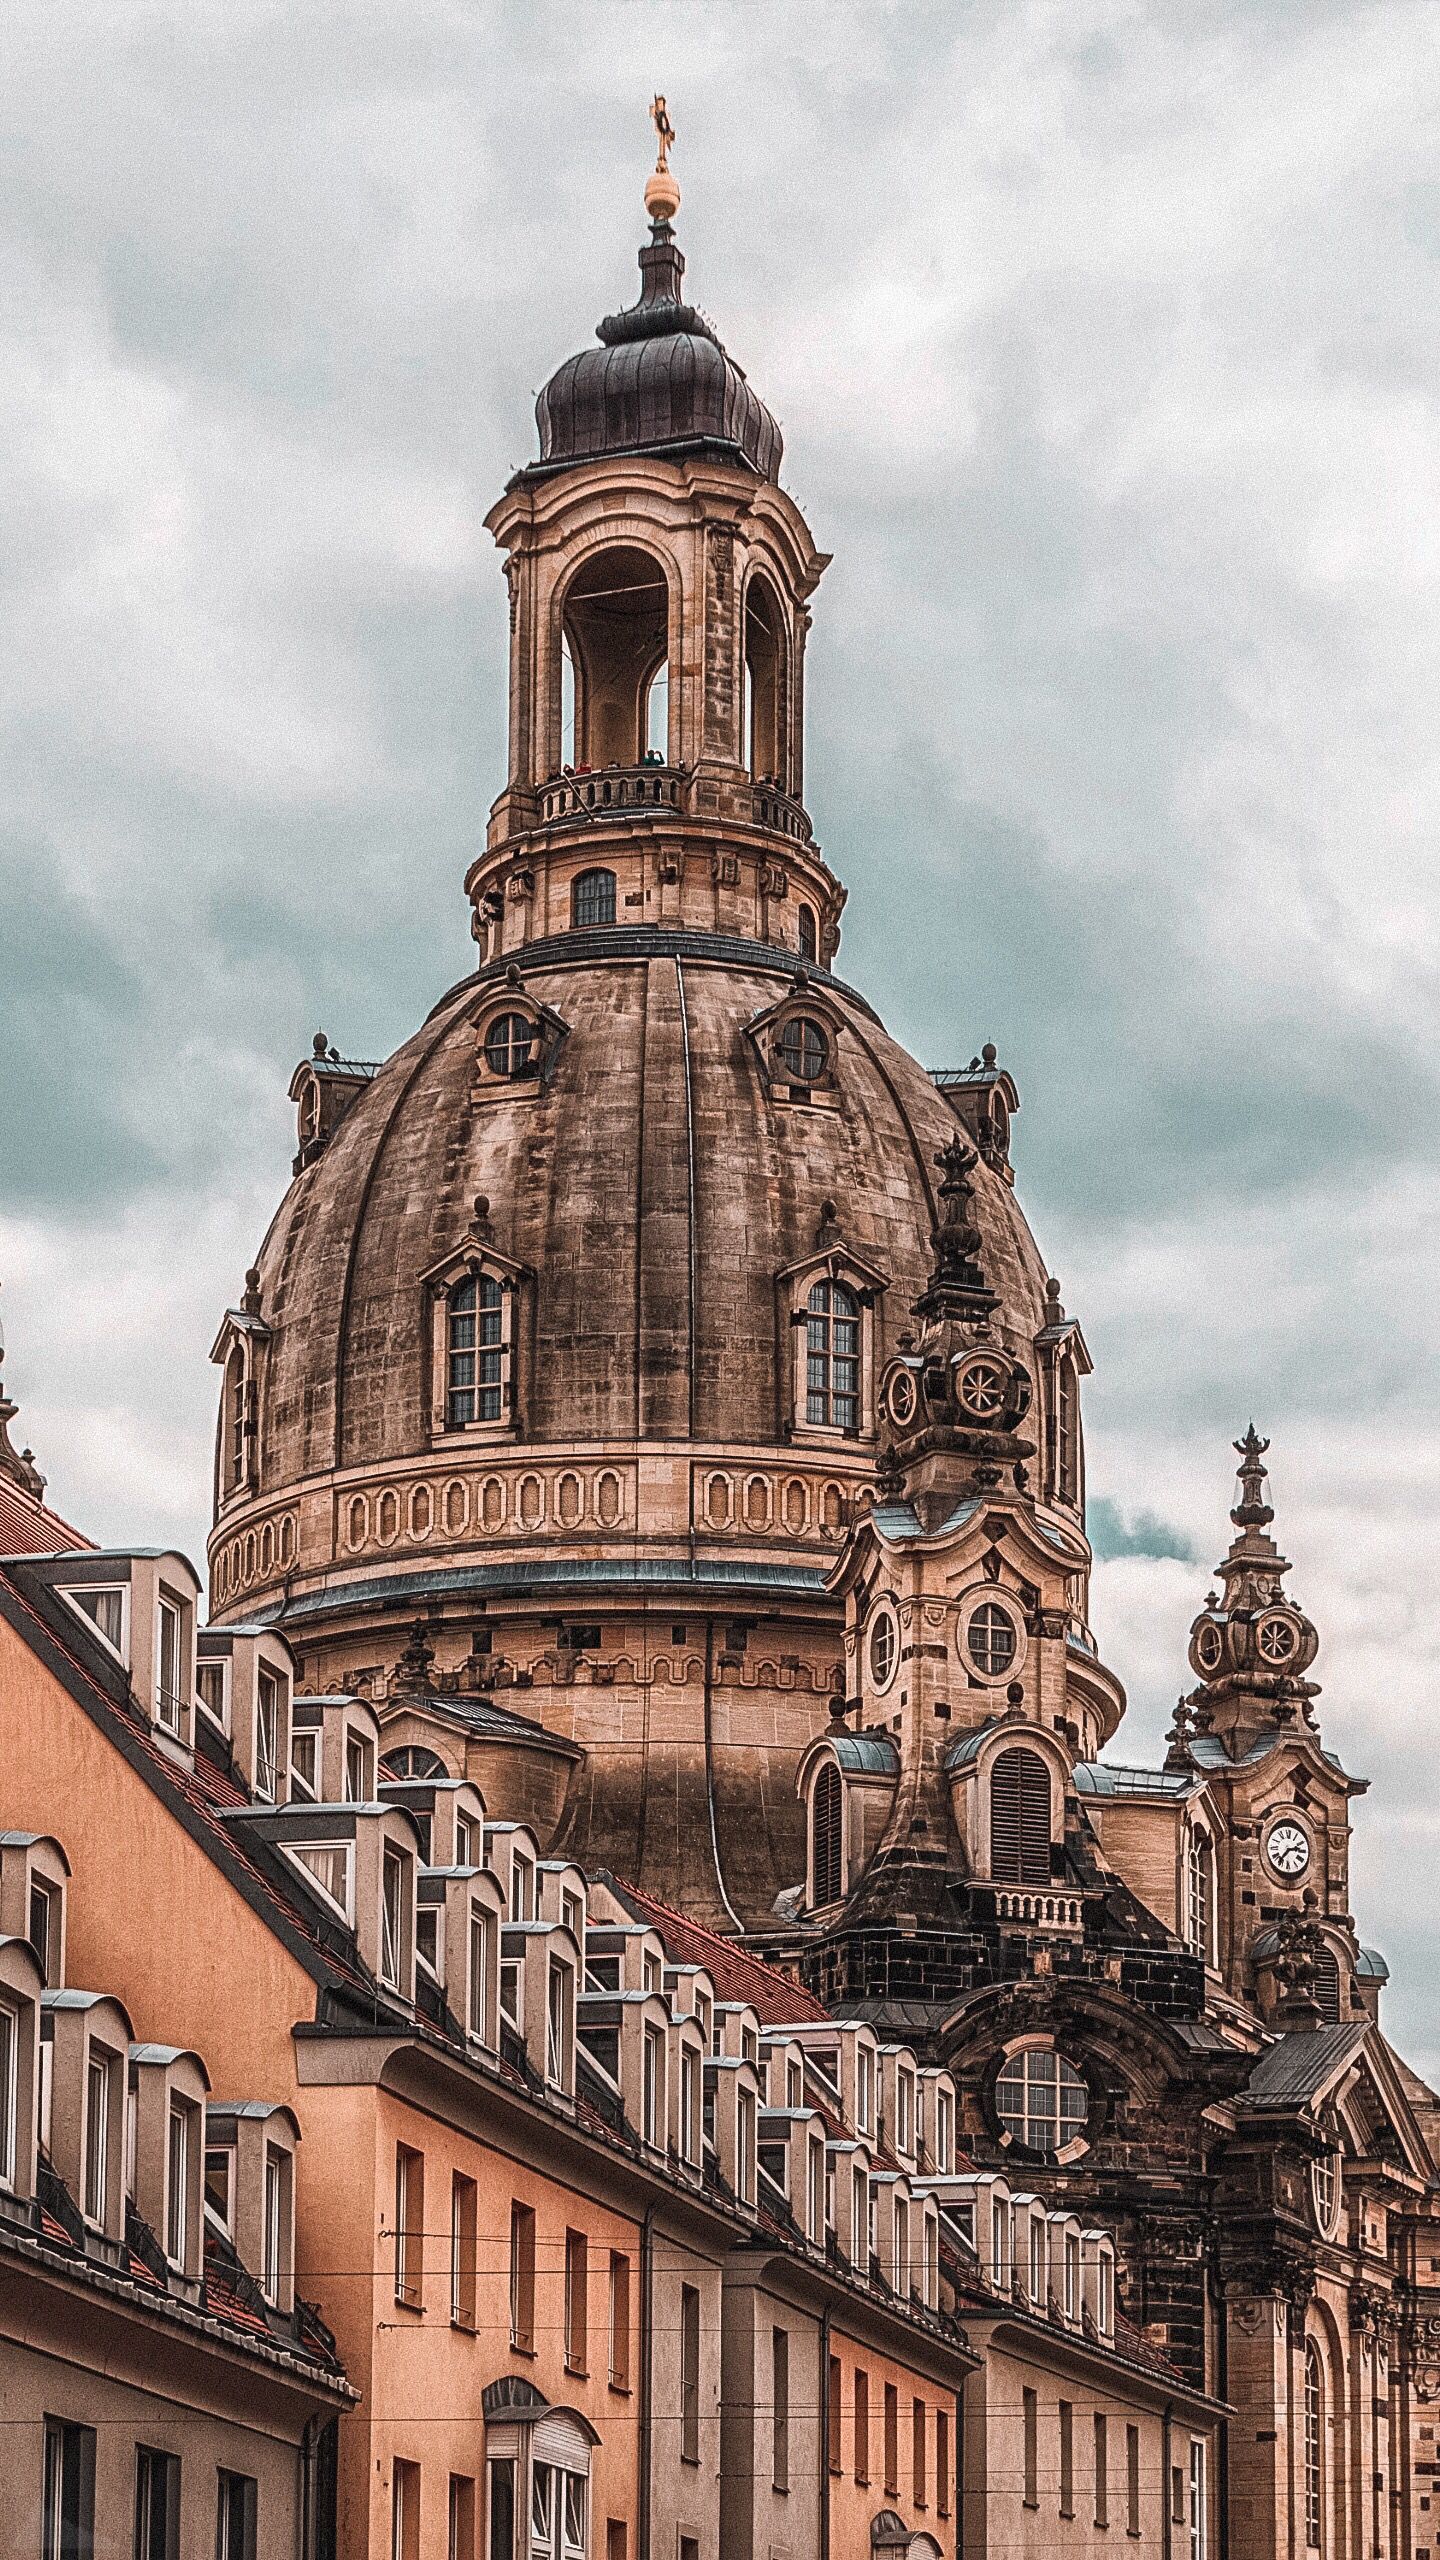 The dome of the Frauenkirche in Dresden, Germany. - Architecture